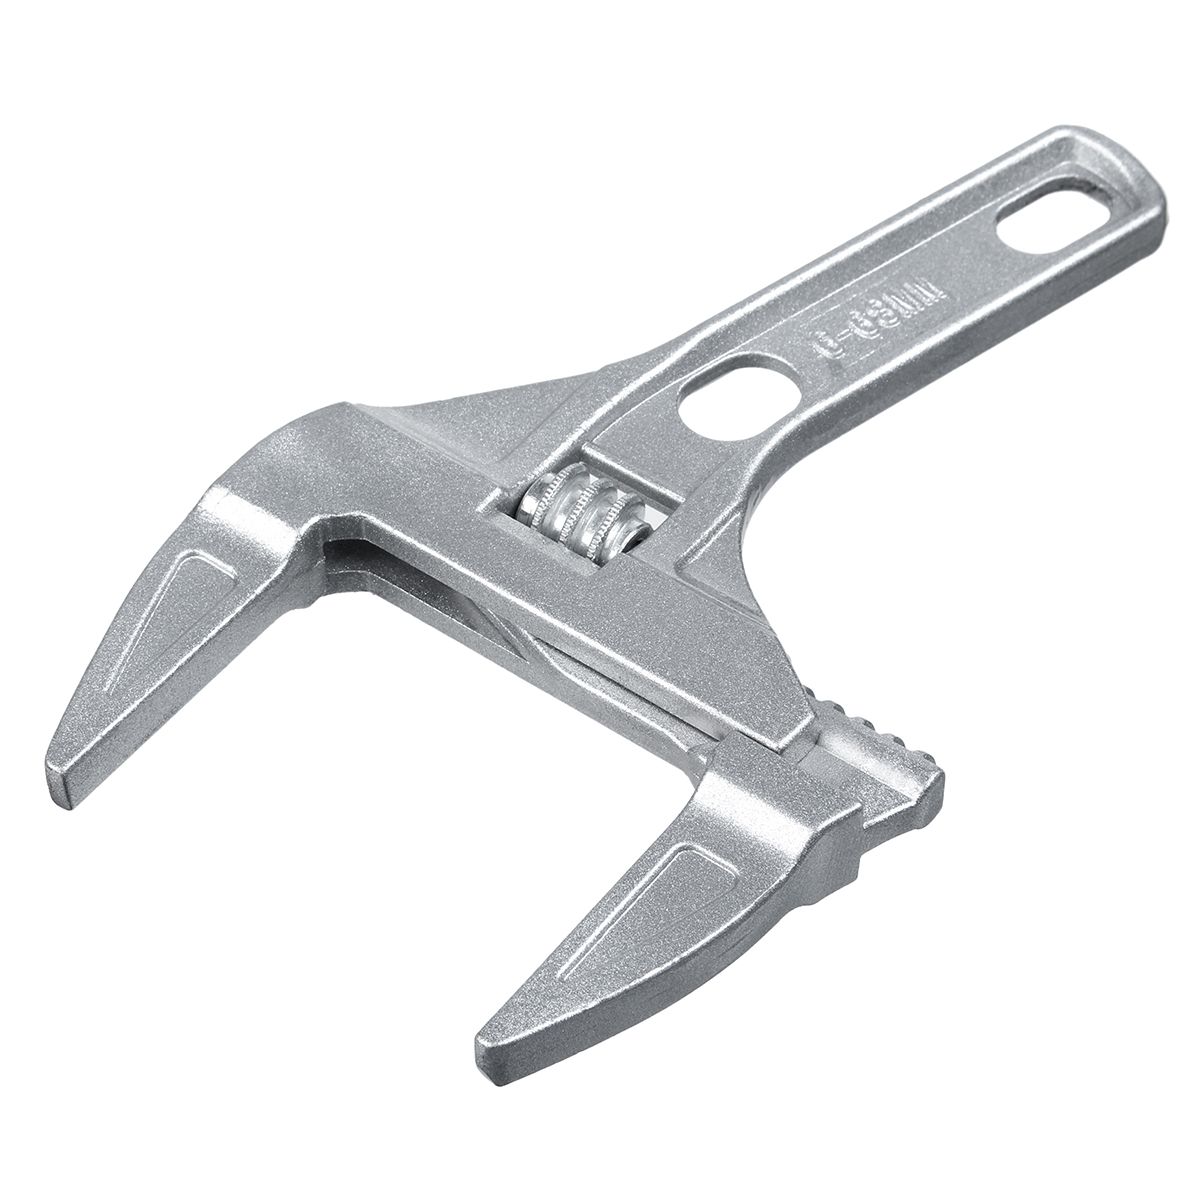 Adjustable-Spanner-16-68mm-Big-Opening-Spanner-Wrench-Mini-Nut-Key-Hand-Tools-Metal-Universal-Spanne-1625089